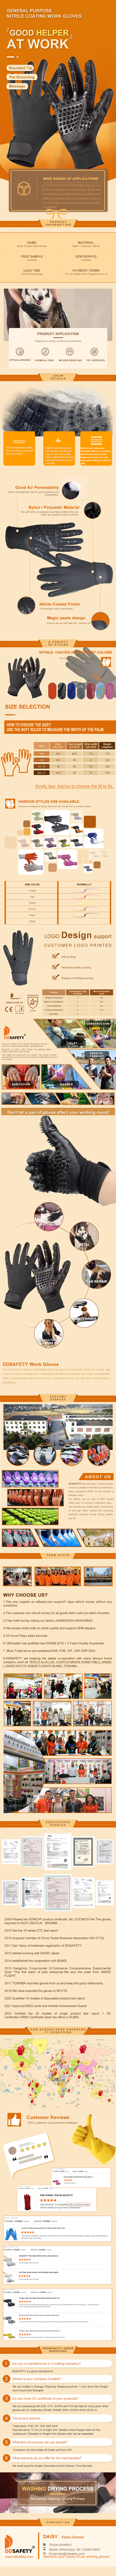 Premium Nylon Nitrile Pet Care Work Gloves PPR rubber on palm velcro at cuff 3D-Comfort Stretchy Fit, Firm Grip, Durable, Breathable & Cool-DNN714 Premium Nylon Nitrile Pet Care Gloves PPR rubber on palm velcro at cuff 3D-Comfort Stretchy Fit, Firm Grip, Durable, Breathable & Cool-DNN714 Nitrile Work Gloves PPR rubber on palm,Work Gloves PPR rubber on palm velcro at cuff,Premium Nylon Nitrile Pet Care Gloves,Pet Care Gloves PPR rubber on palm